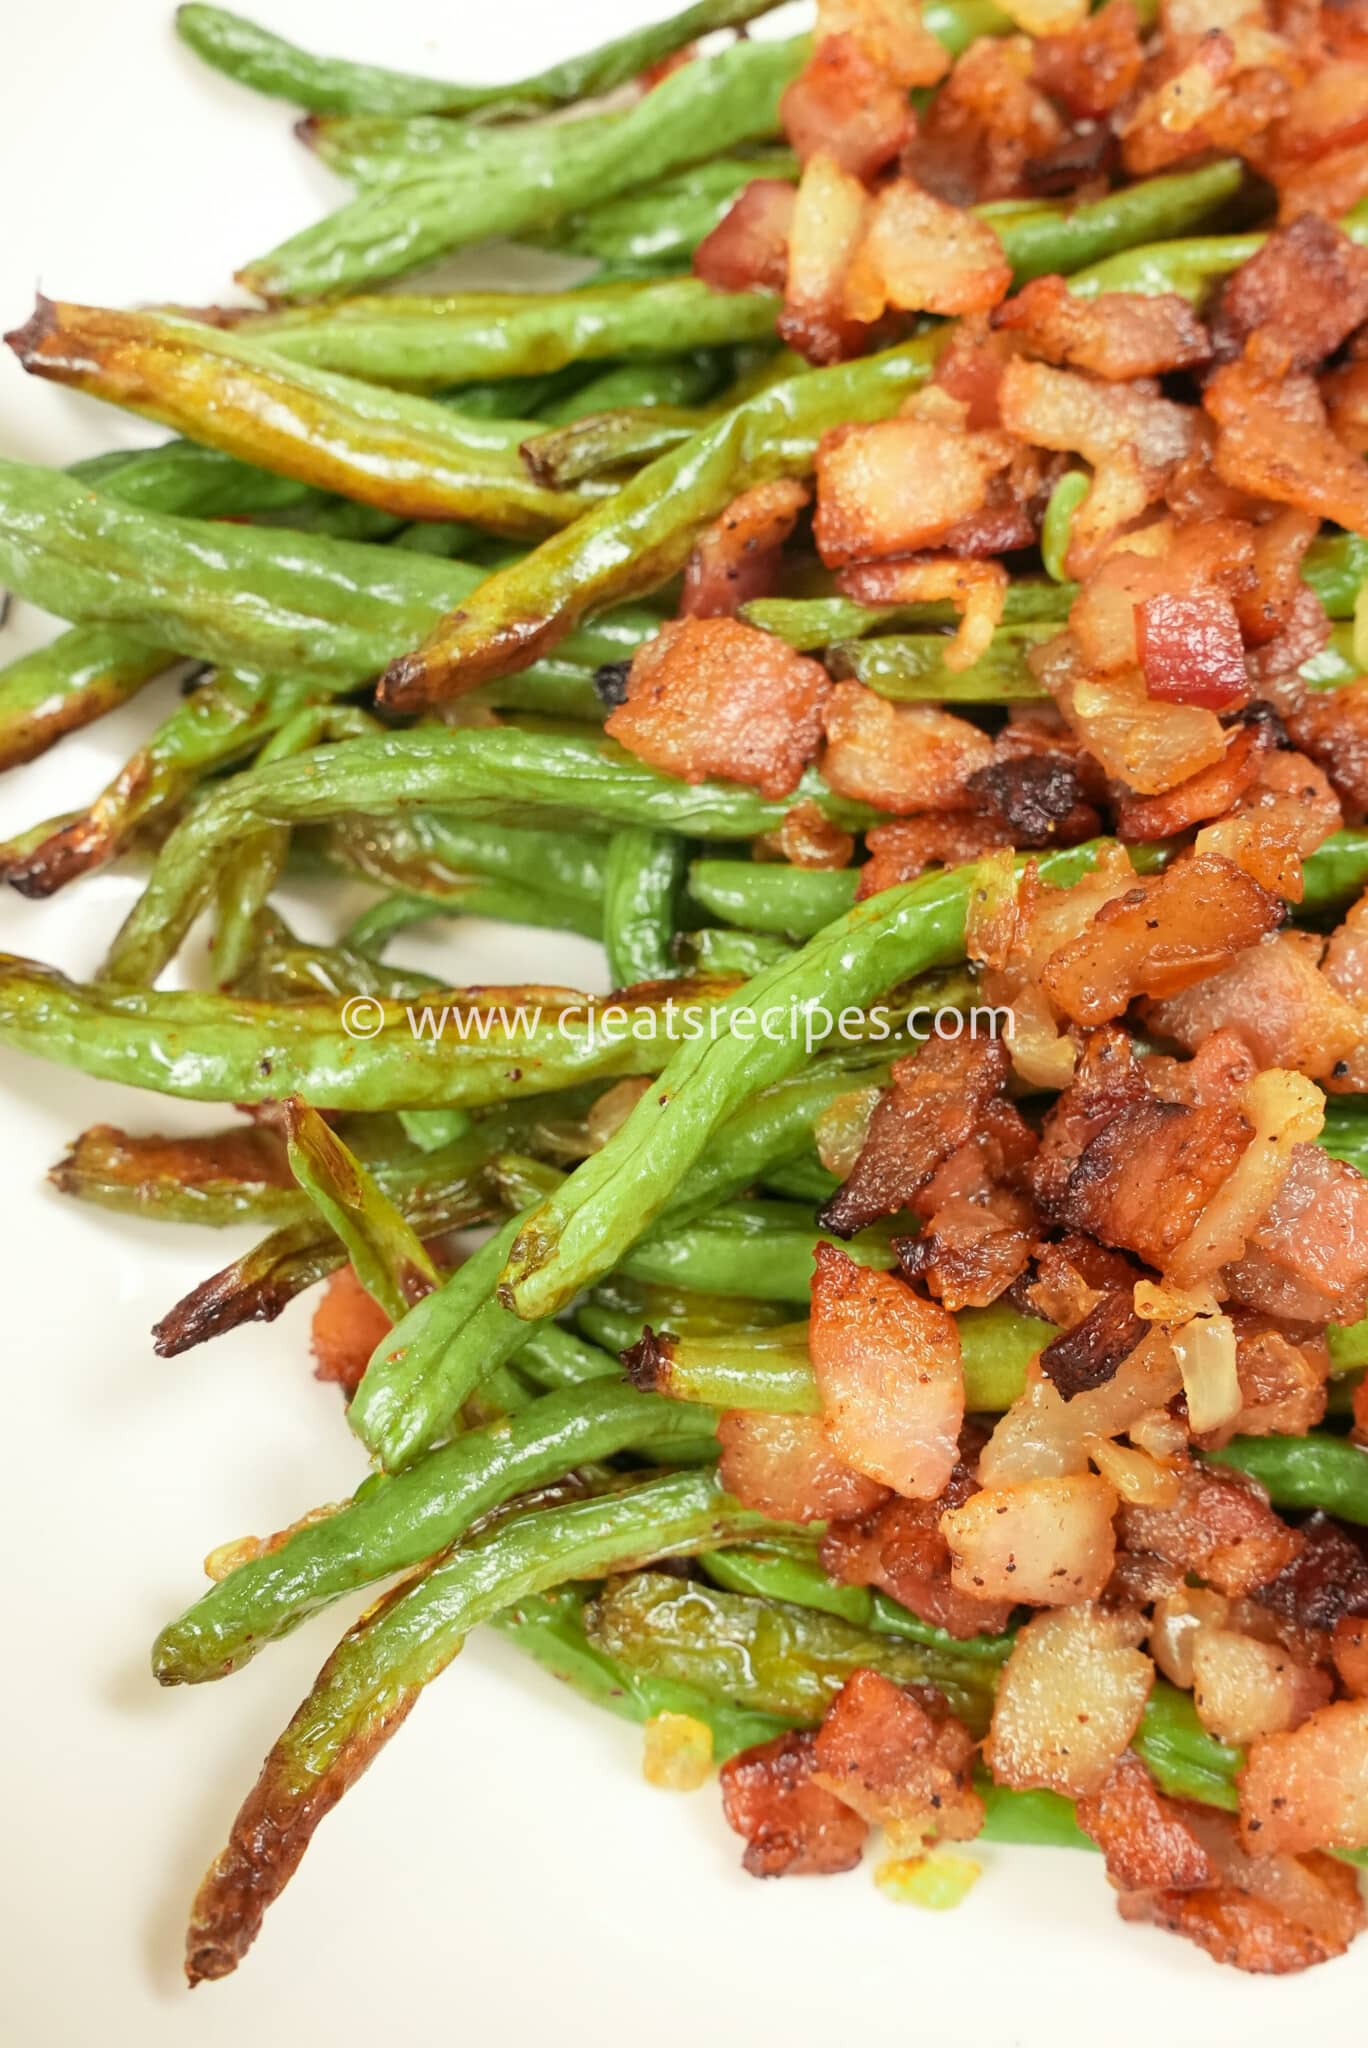 https://cjeatsrecipes.com/wp-content/uploads/2022/11/Green-Beans-with-Bacon-plated-close-up-1-scaled.jpg